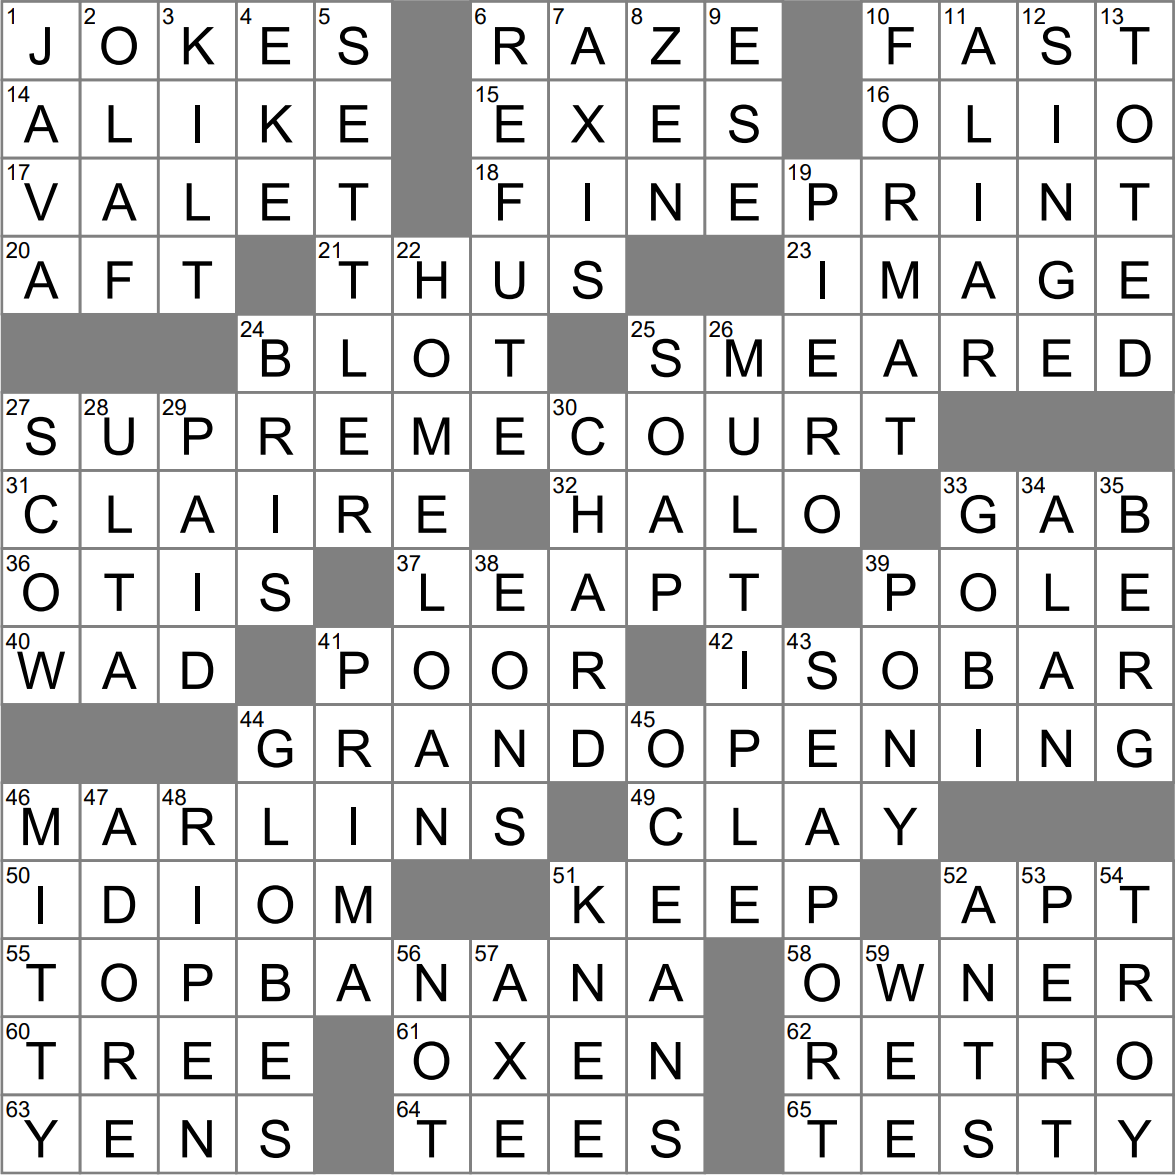 donald-glover-s-community-role-crossword-clue-archives-laxcrossword